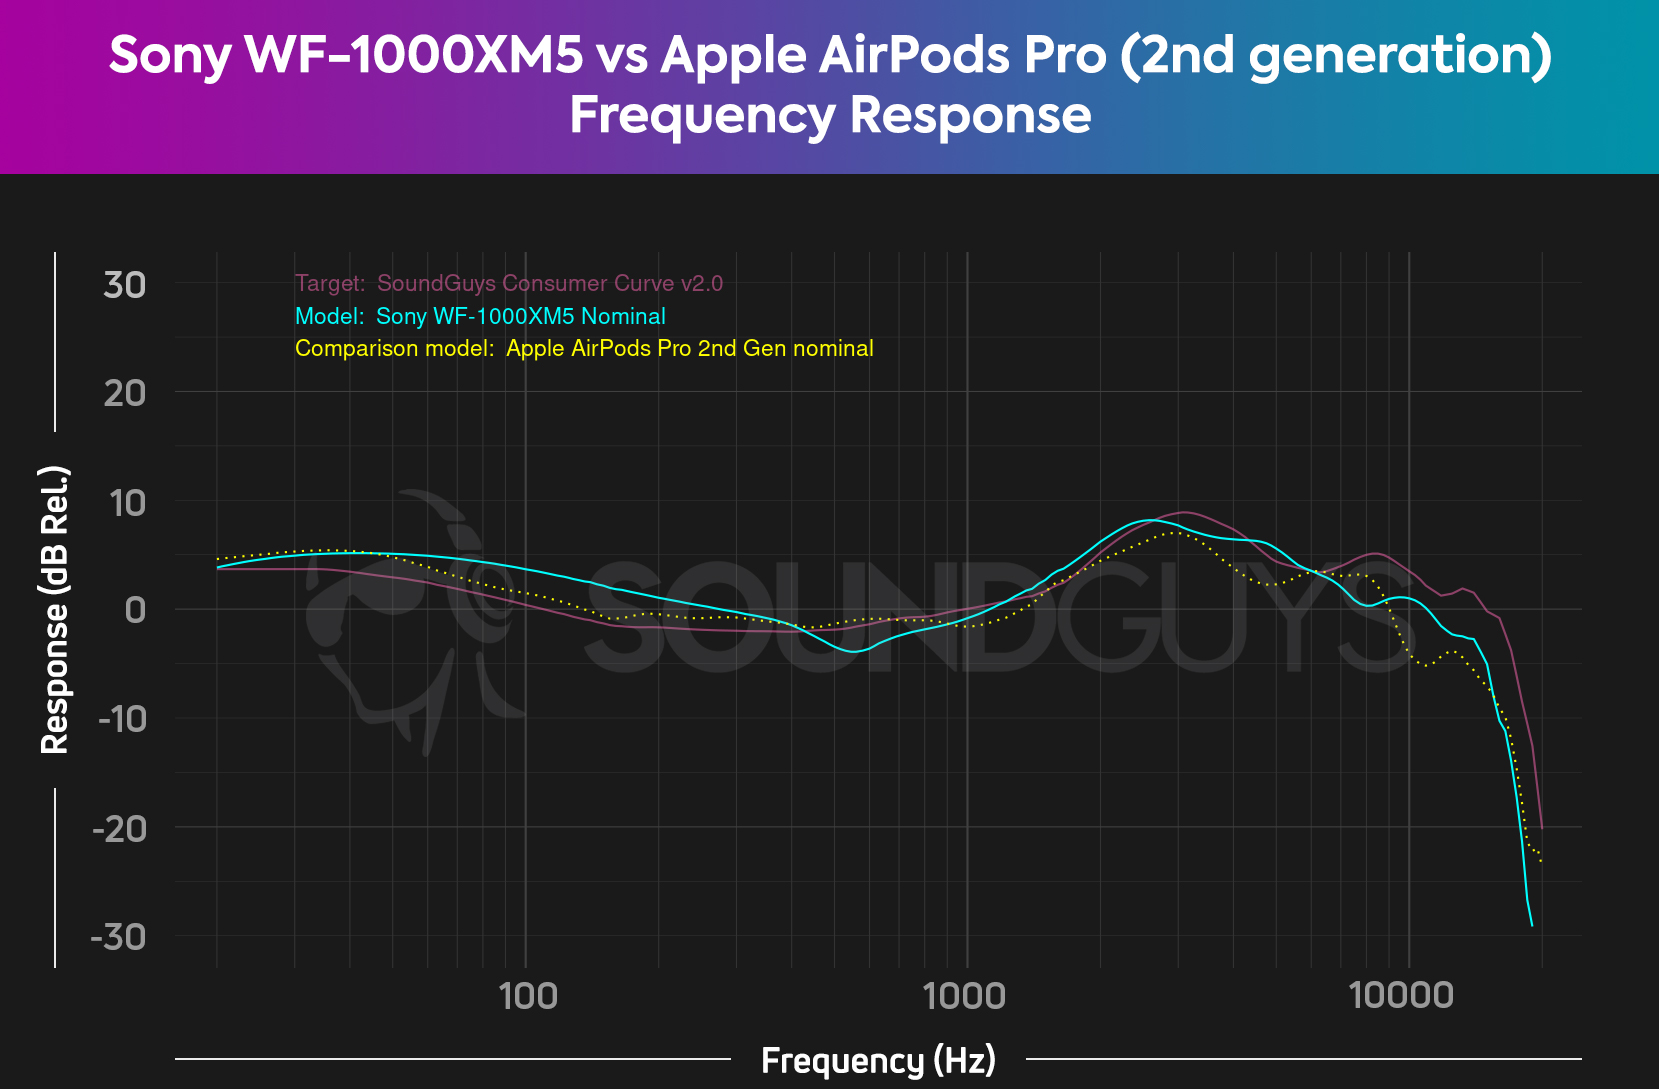 Sony WF 1000XM5 vs Apple AirPods Pro 2nd generation comparison frequency response chart